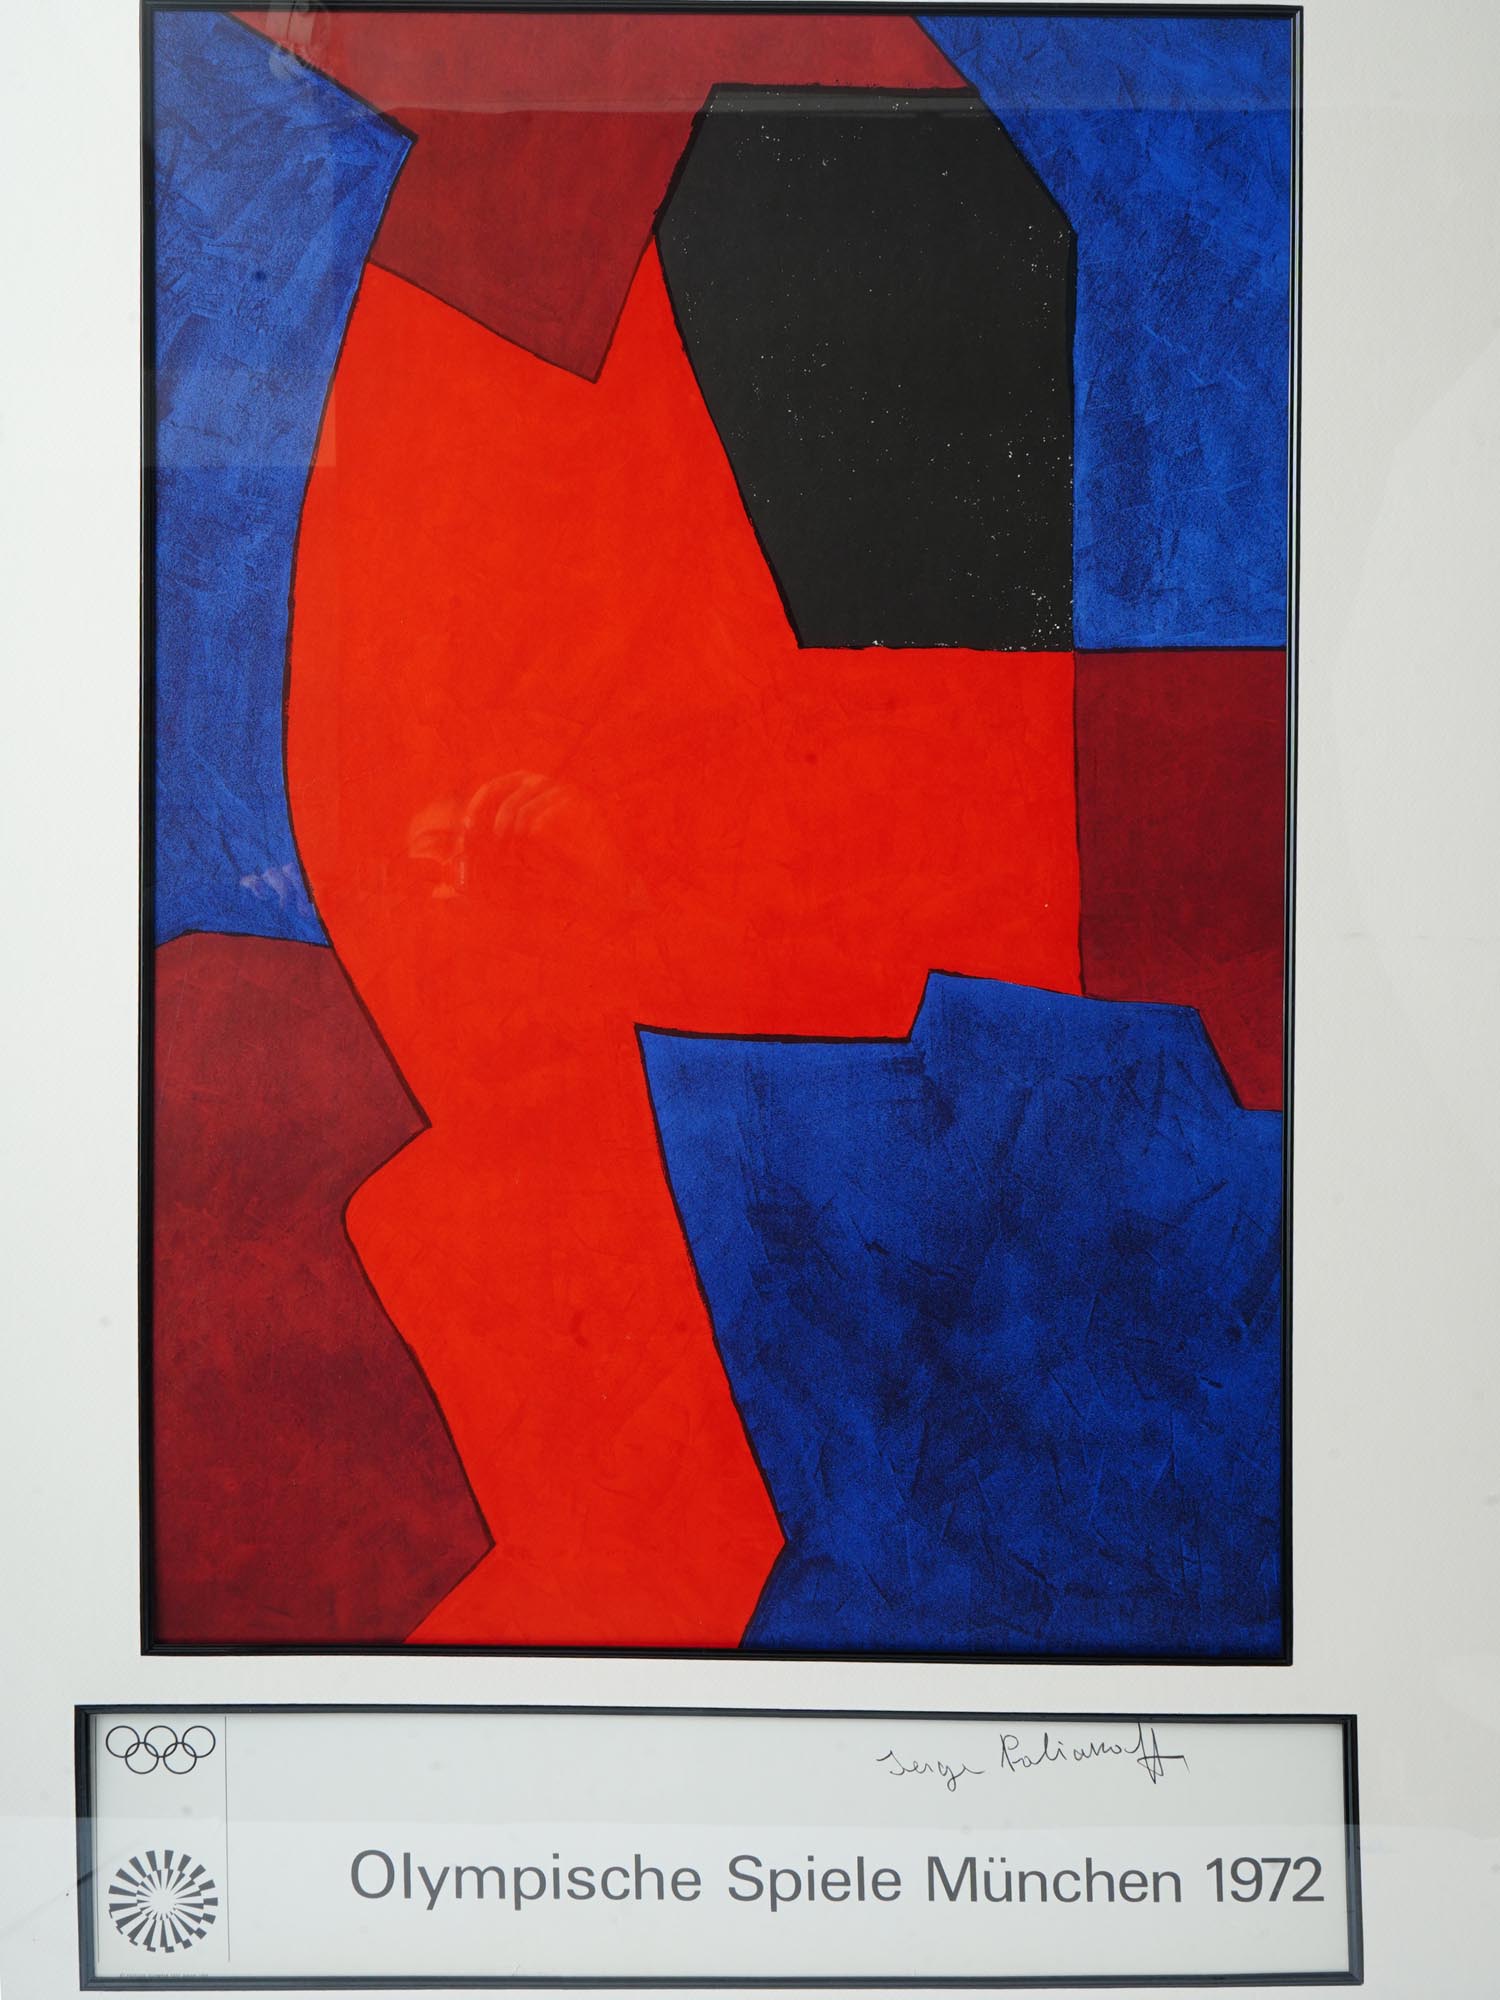 1972 MUNICH OLYMPICS POSTER AFTER SERGE POLIAKOFF PIC-1